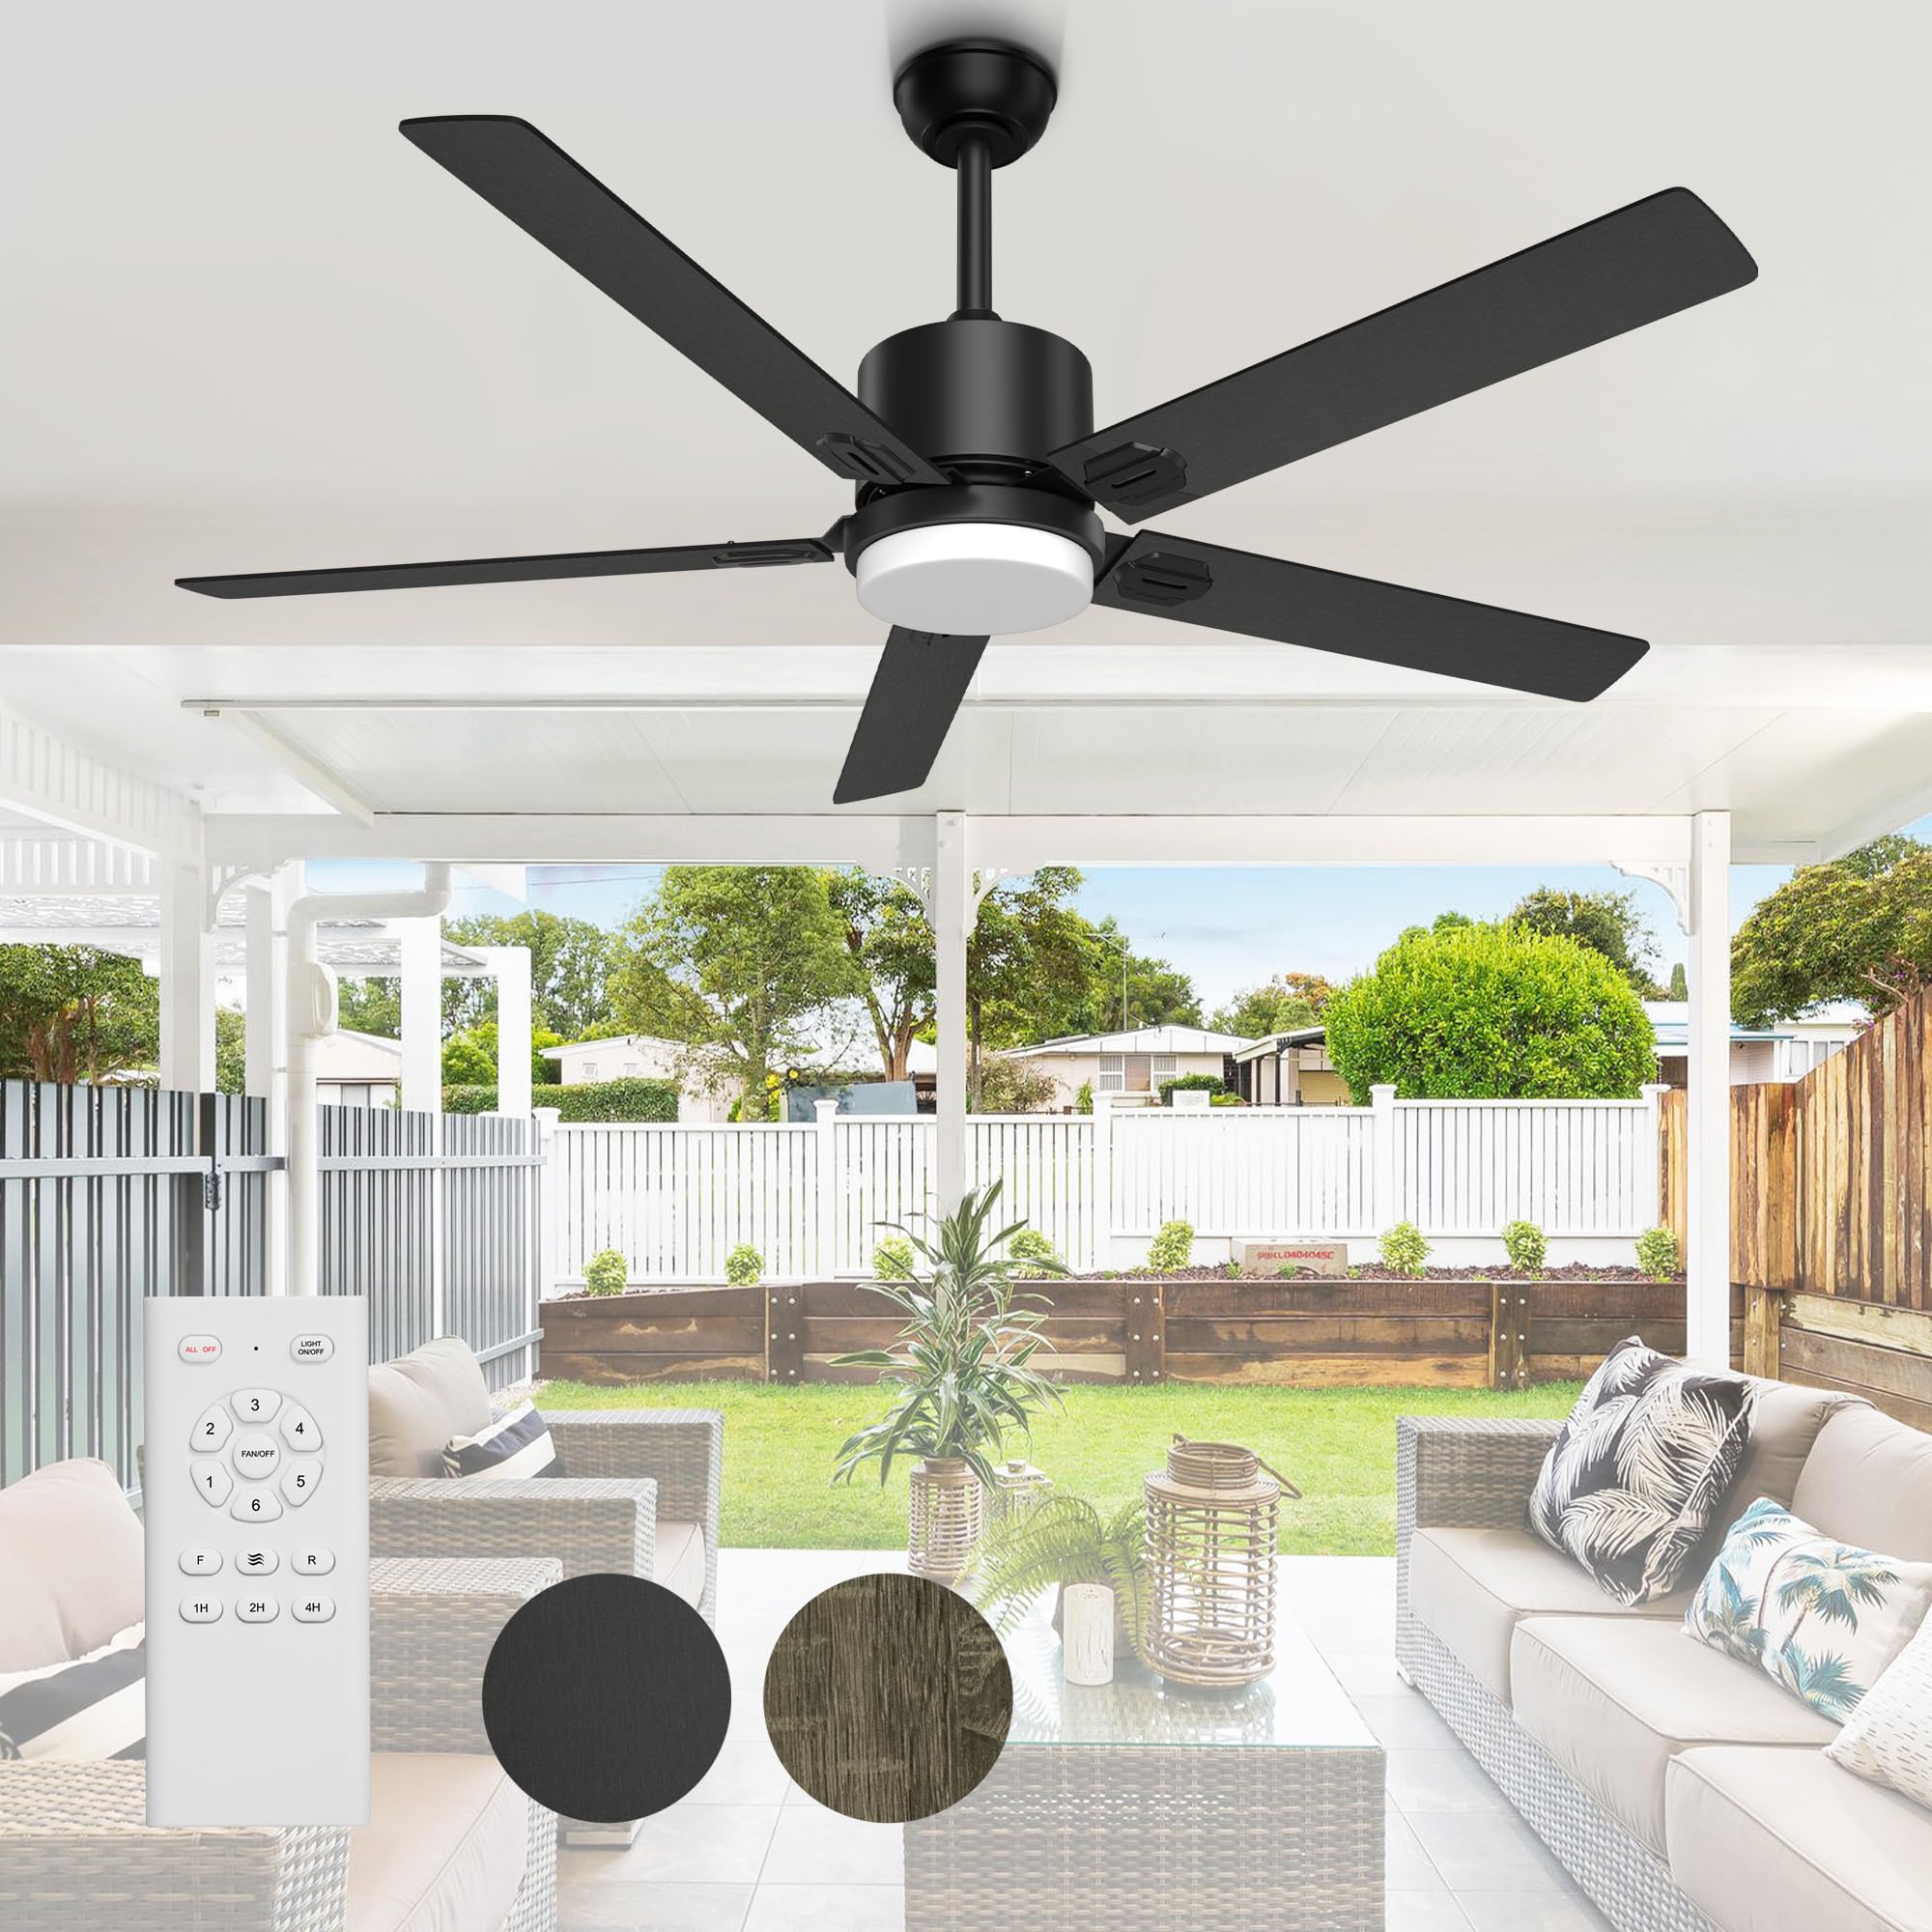 BECLOG Ceiling Fan with Light